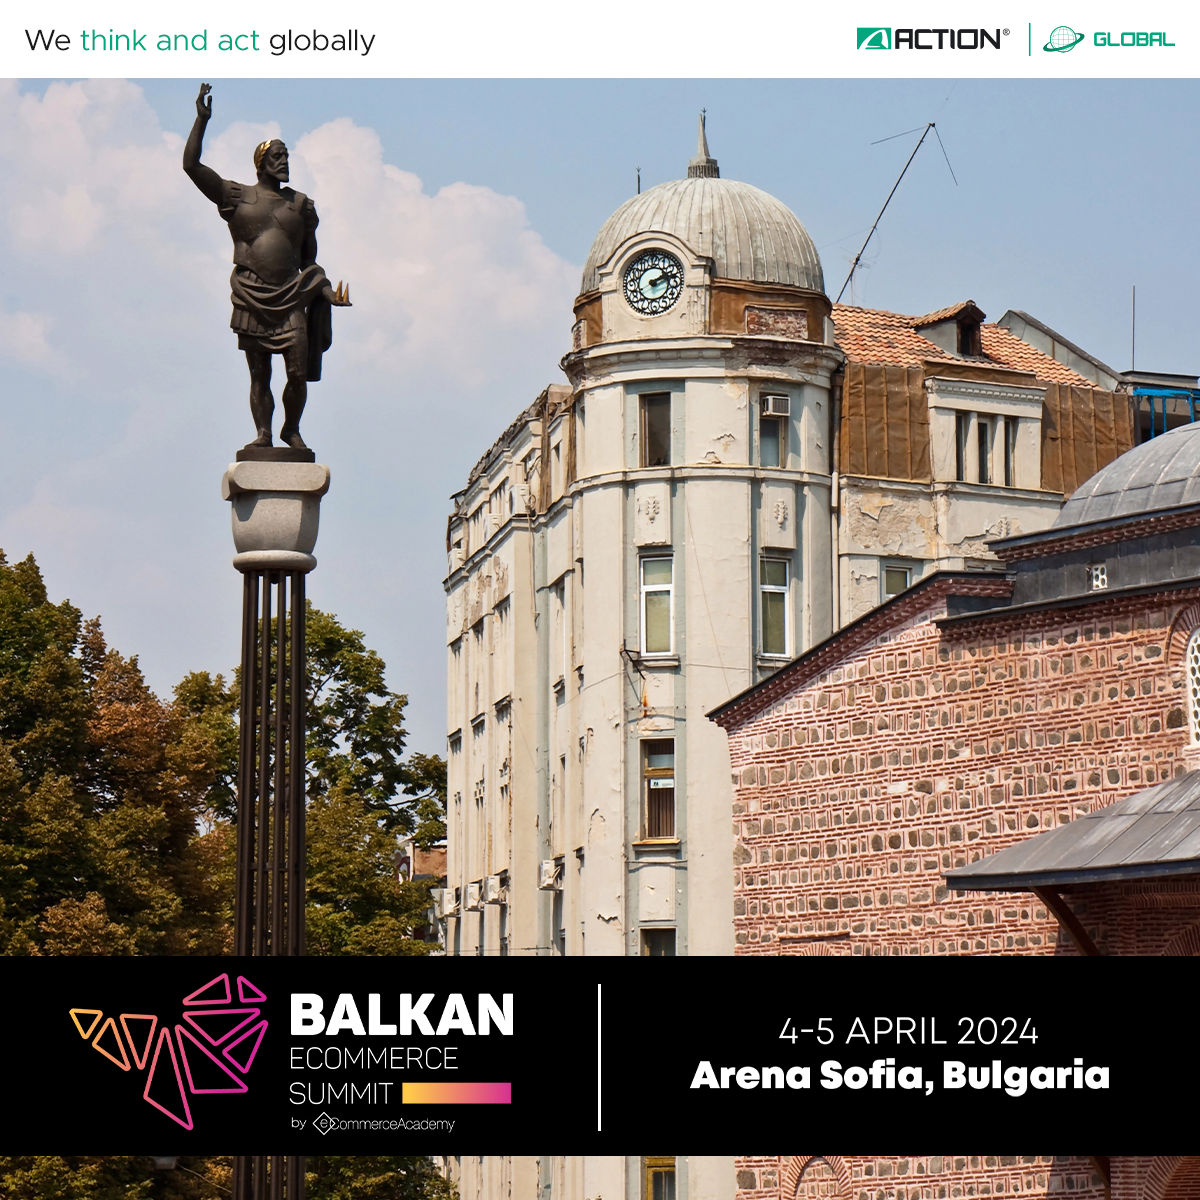 Balkan e-commerce summit 4-5 April 2024 See you there!